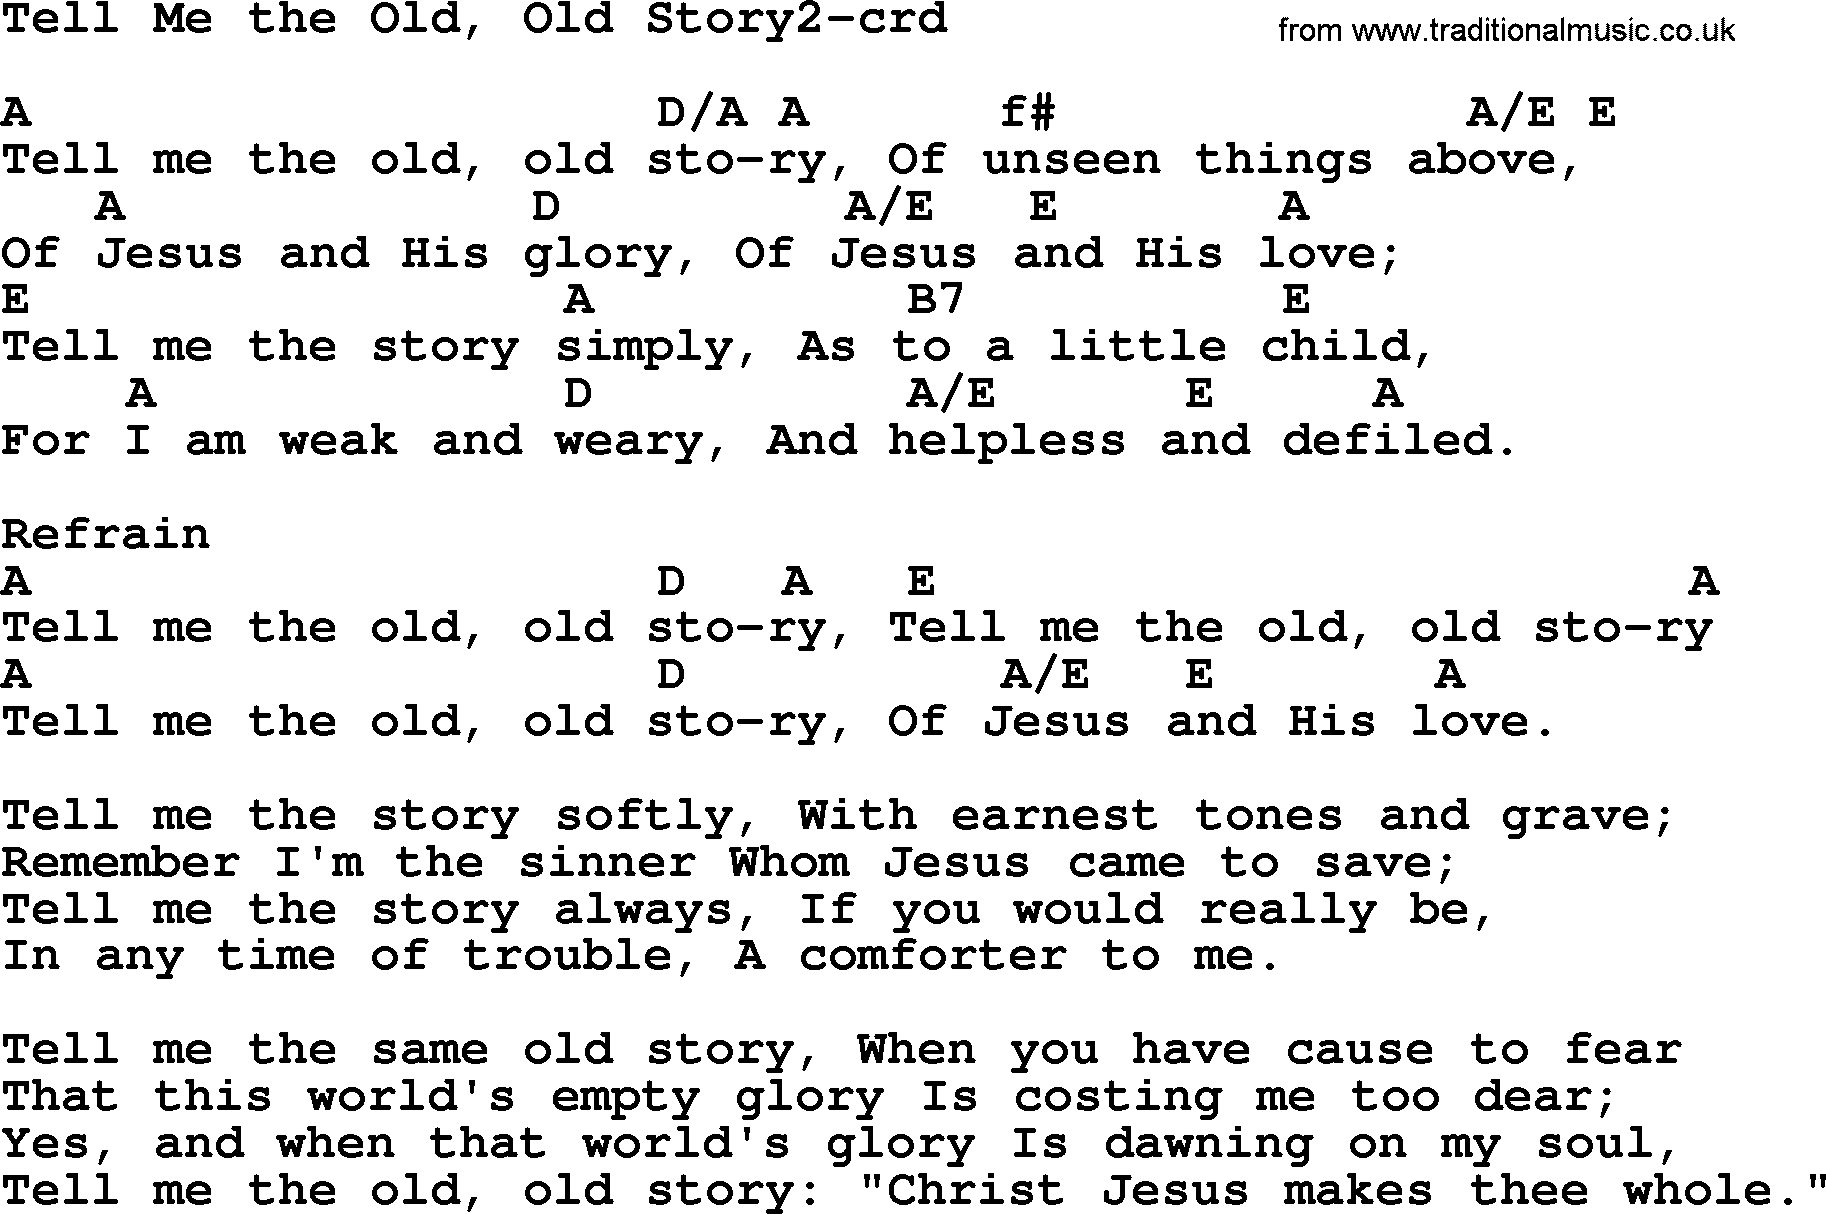 Top 500 Hymn: Tell Me The Old, Old Story2, lyrics and chords